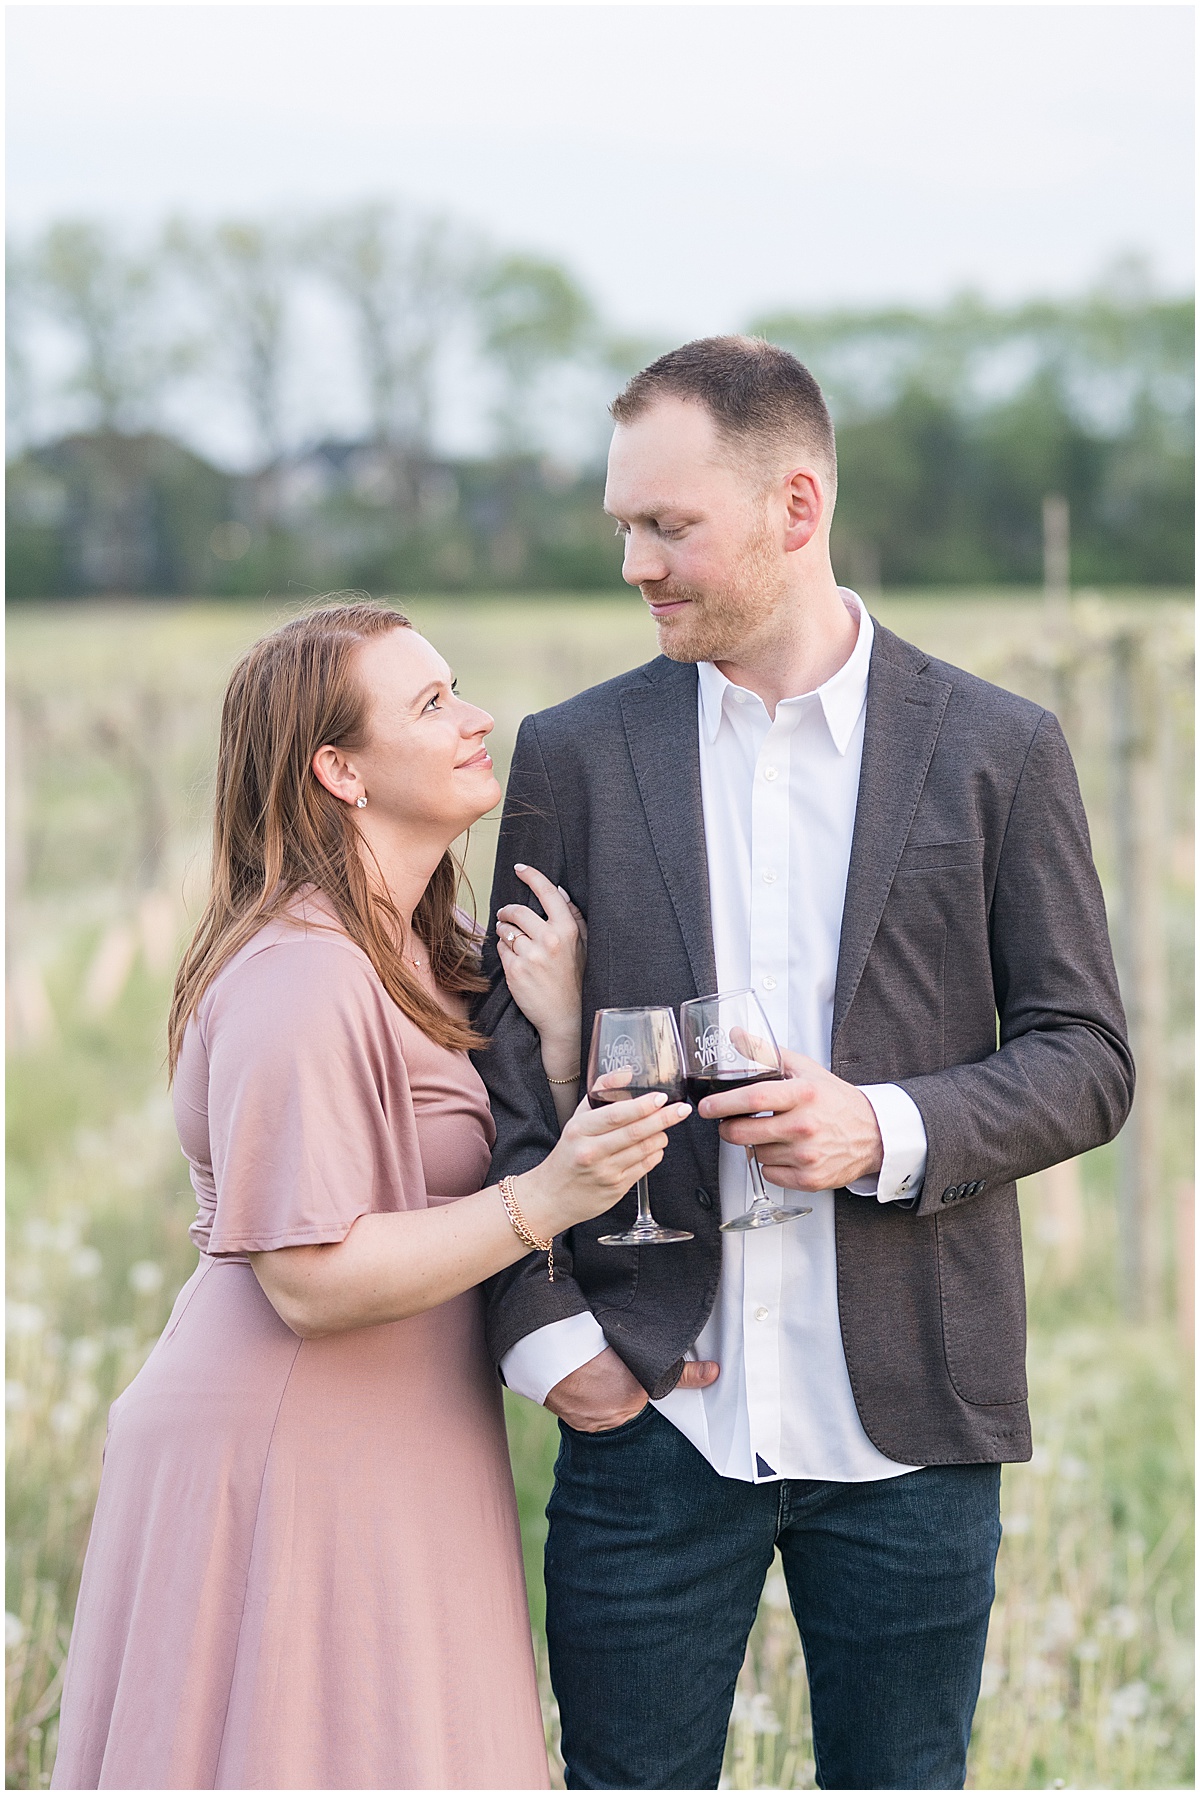 Couple drinking wine during engagement photos at Urban Vines in Carmel, Indiana